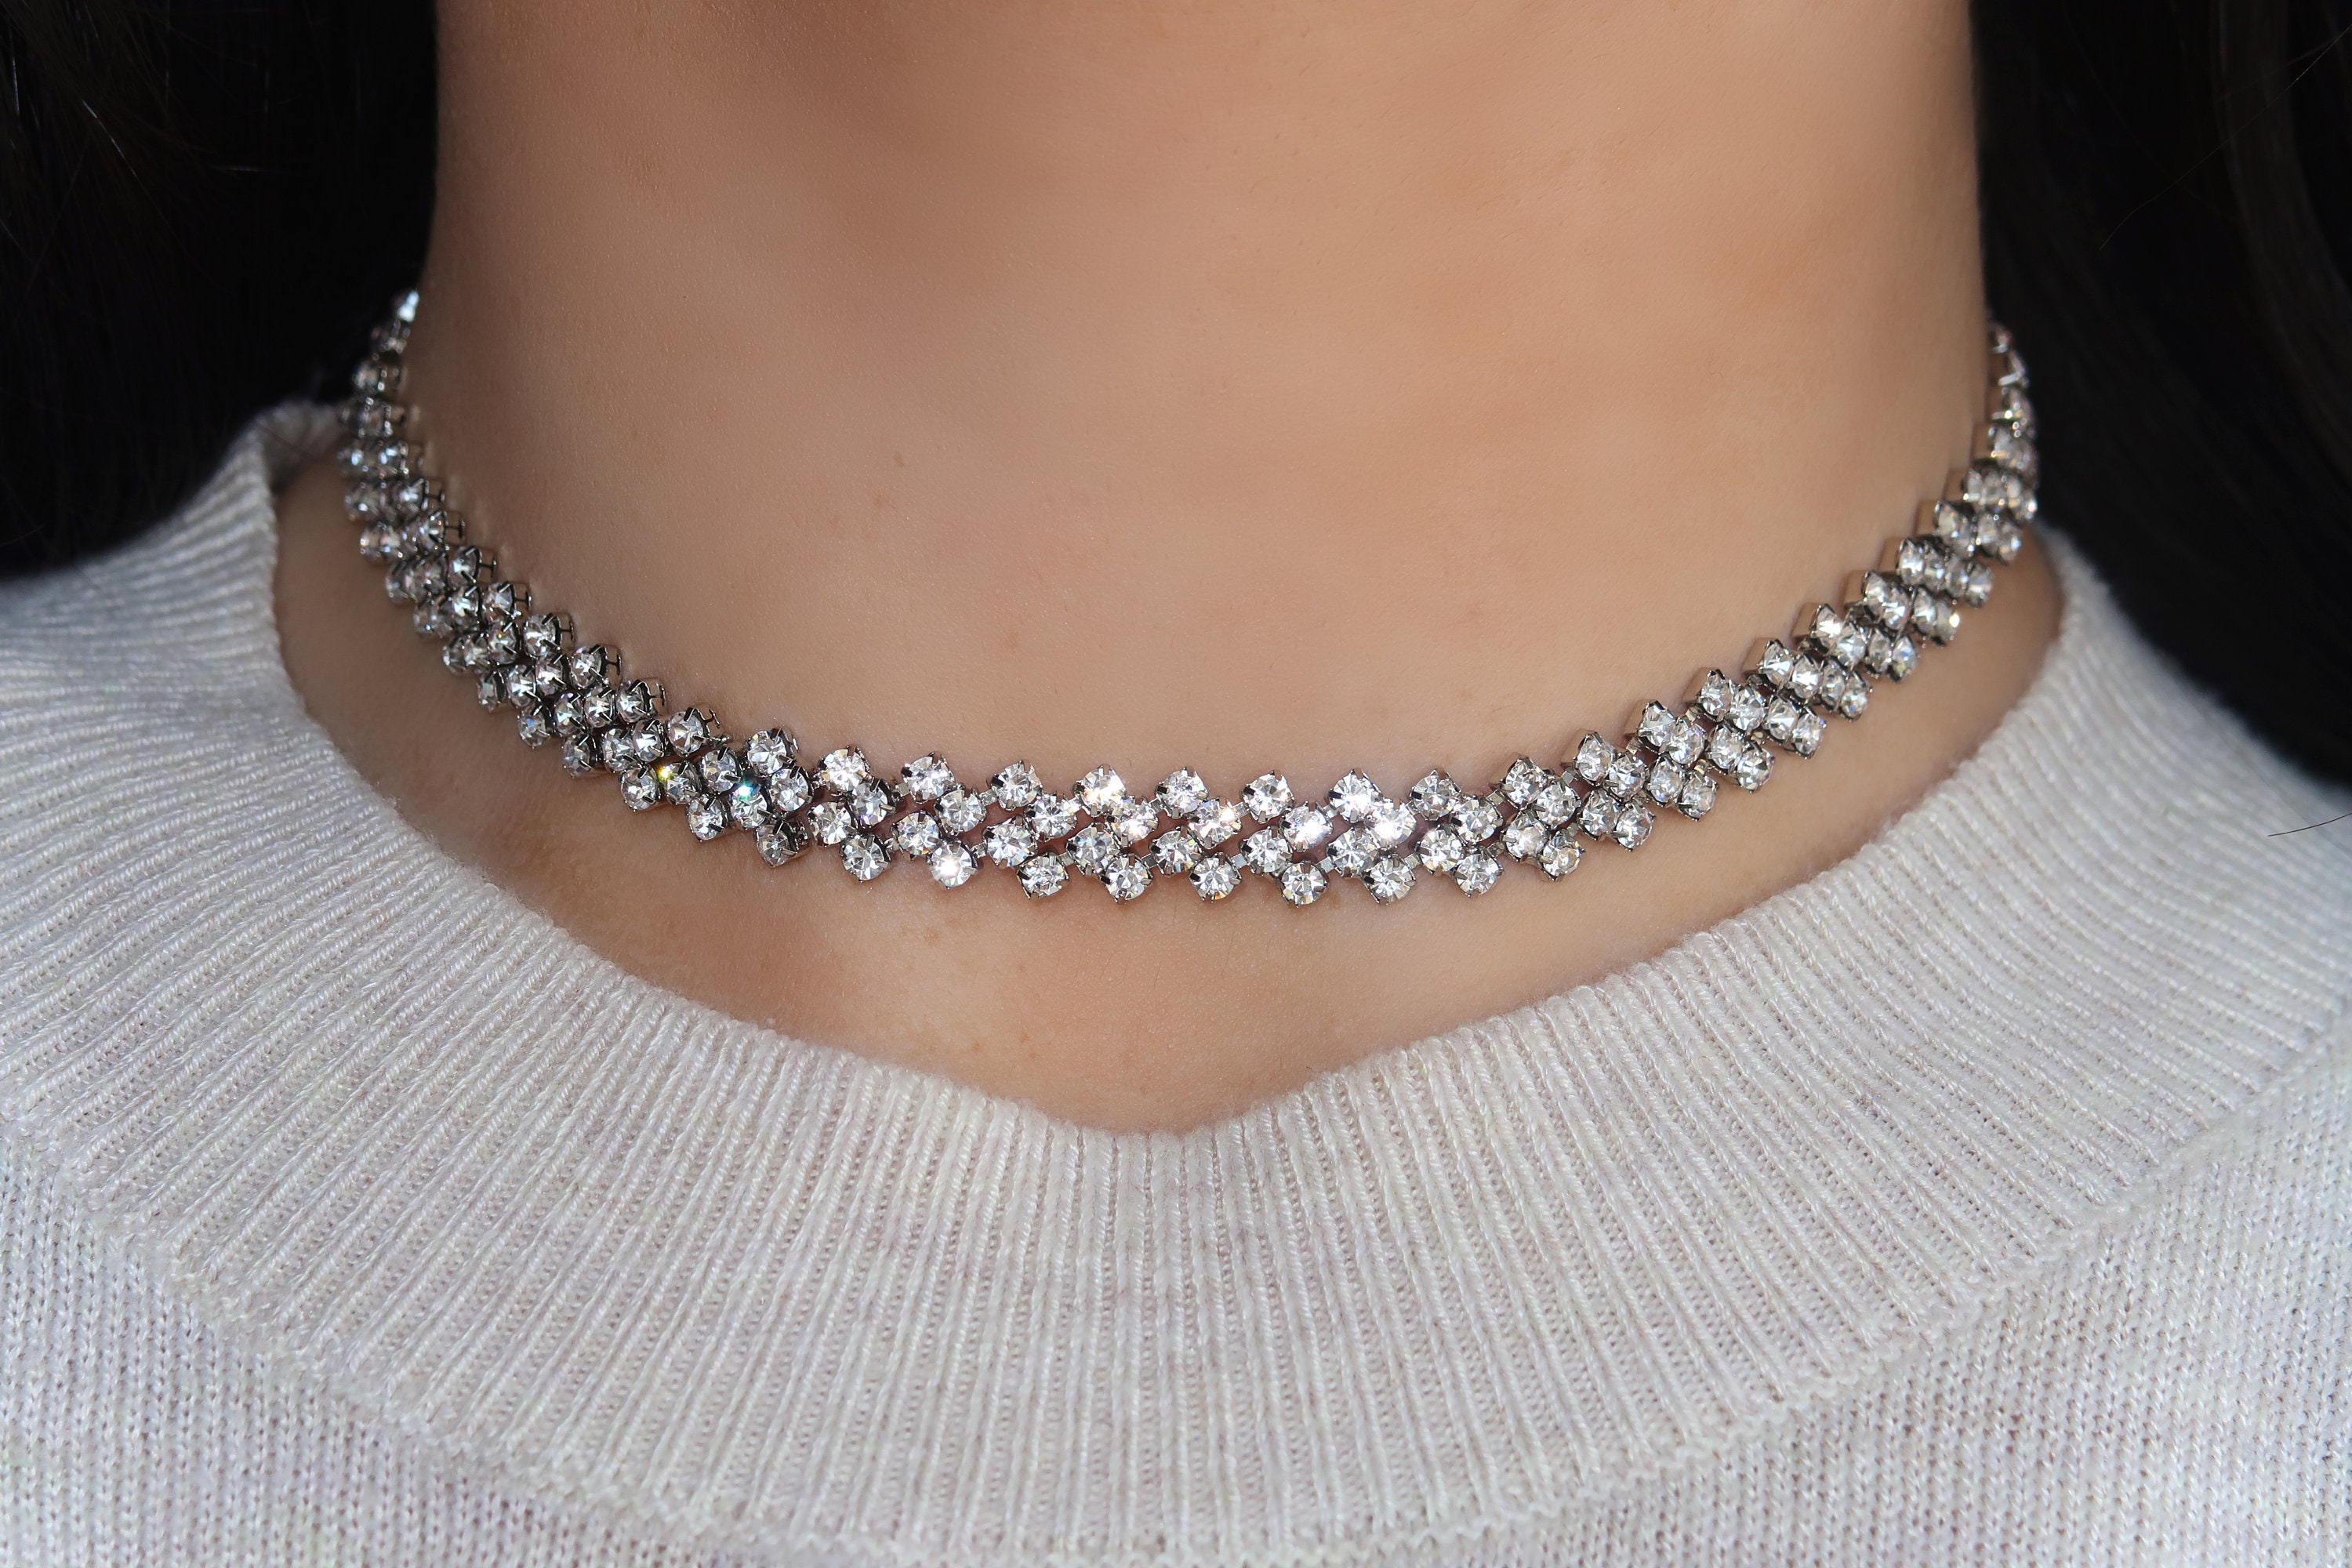 Rhinestone Choker Necklaces Silver Crystal Cz Necklaces Sparkling Diamond Choker  Necklaces Thin Crystal Collar Necklaces Jewelry For Women And Girls(f